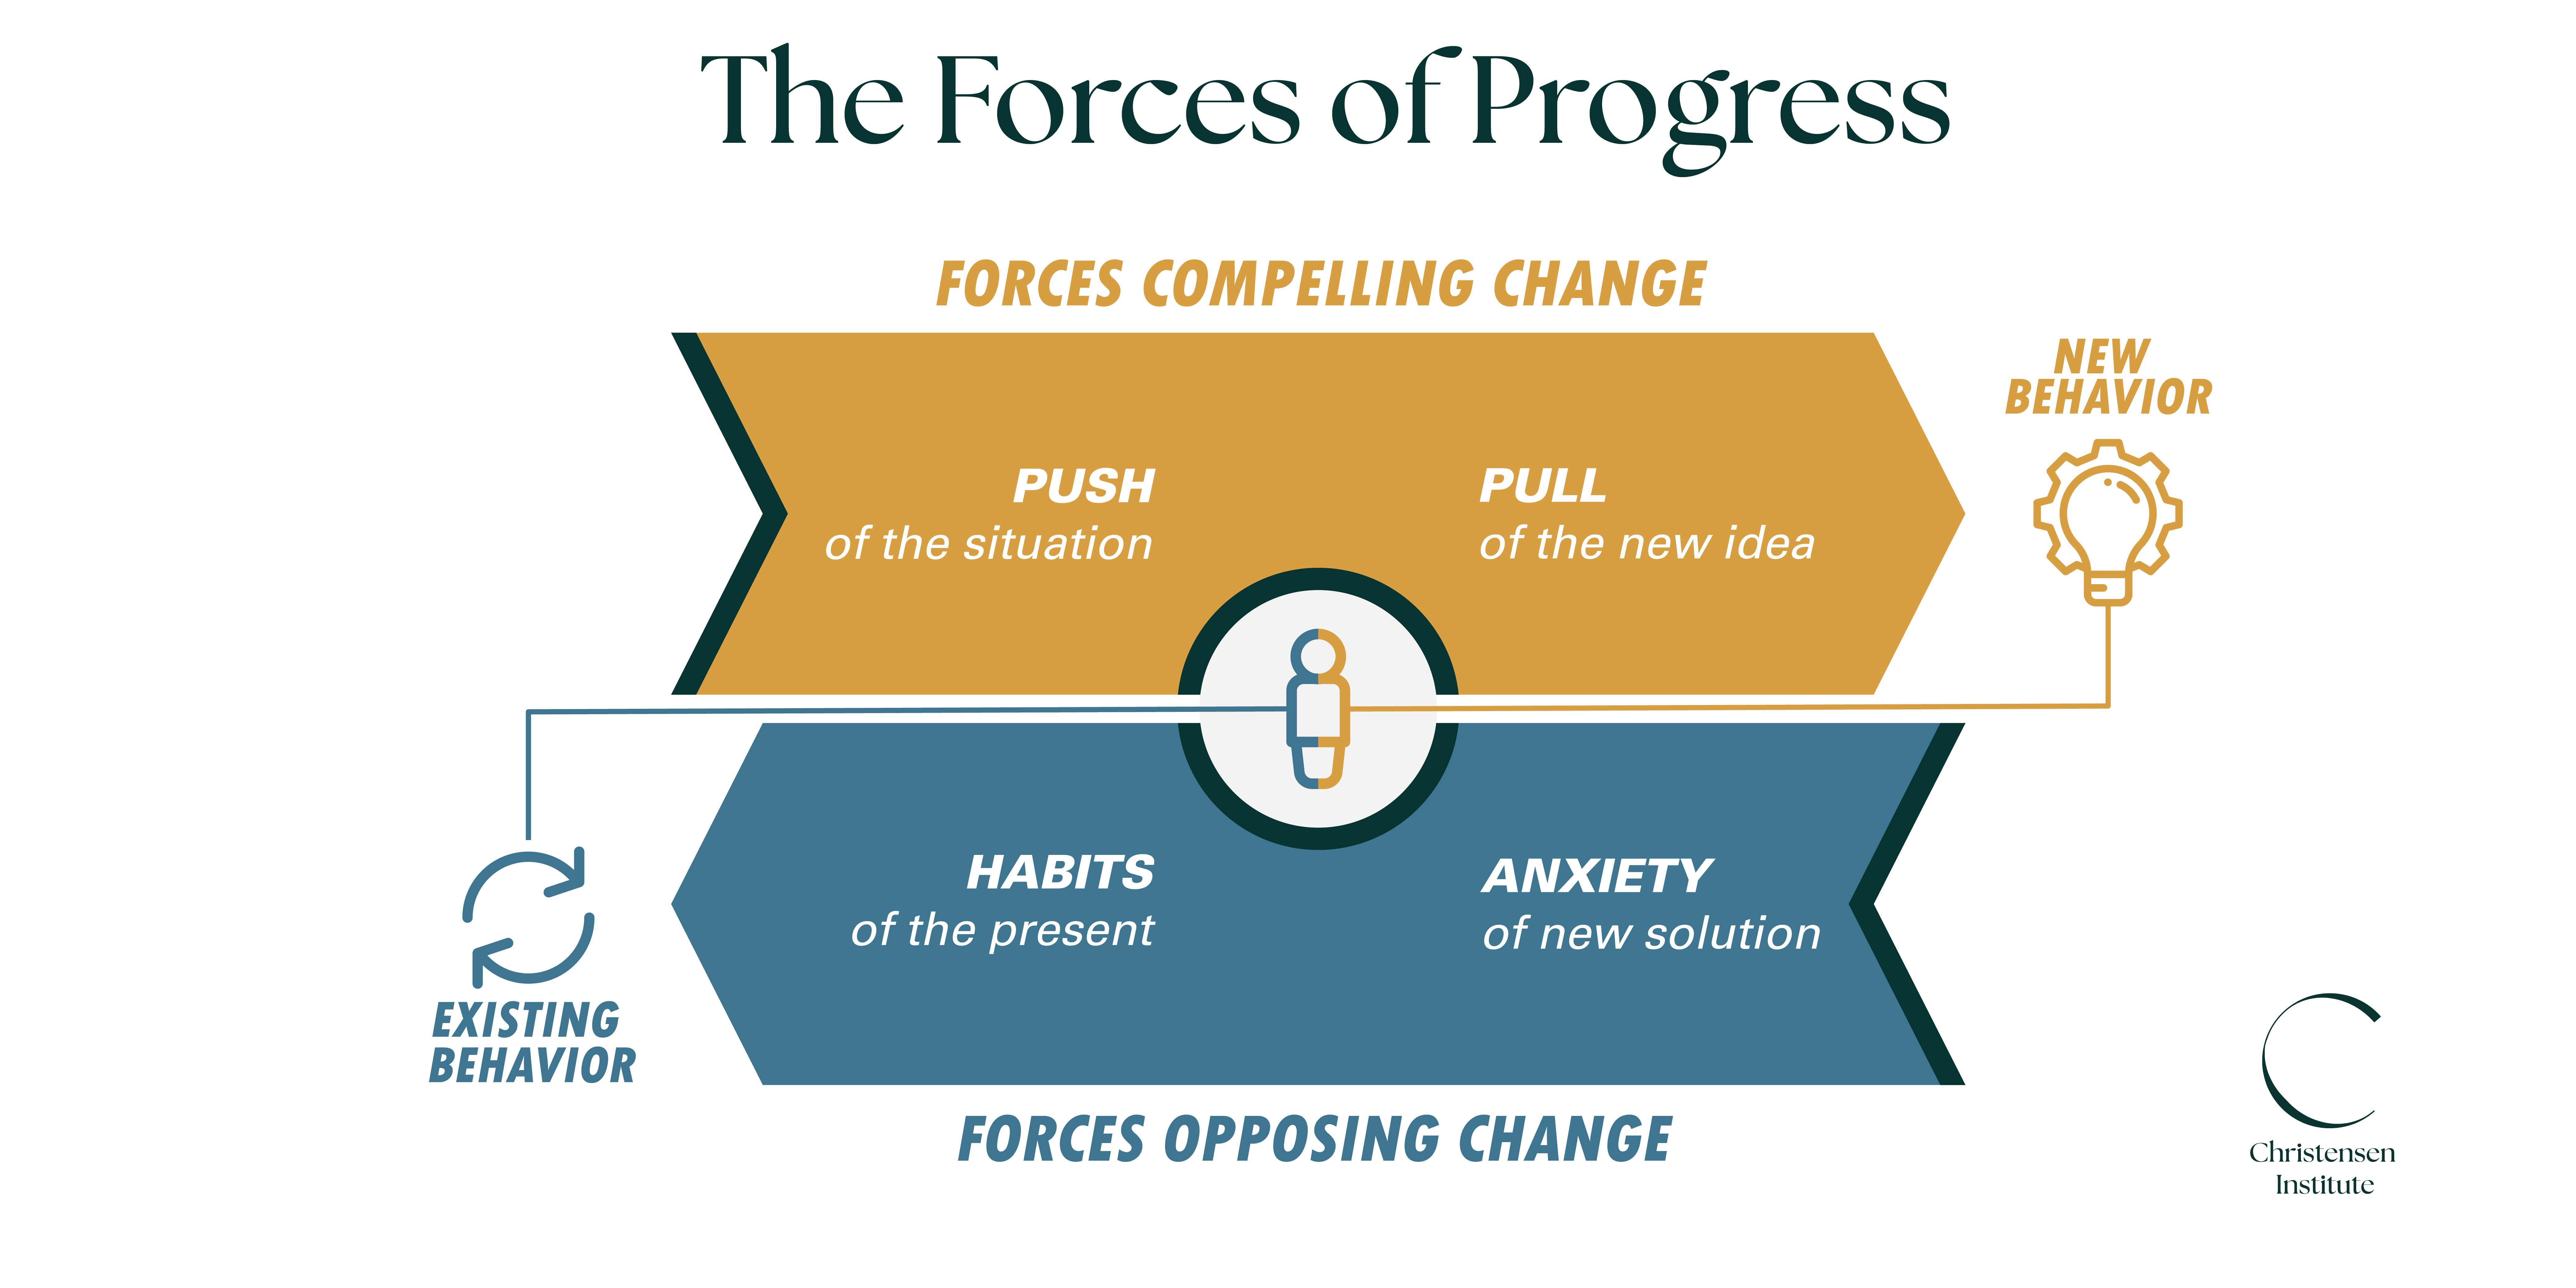 Graphic titled The Forces of Progress